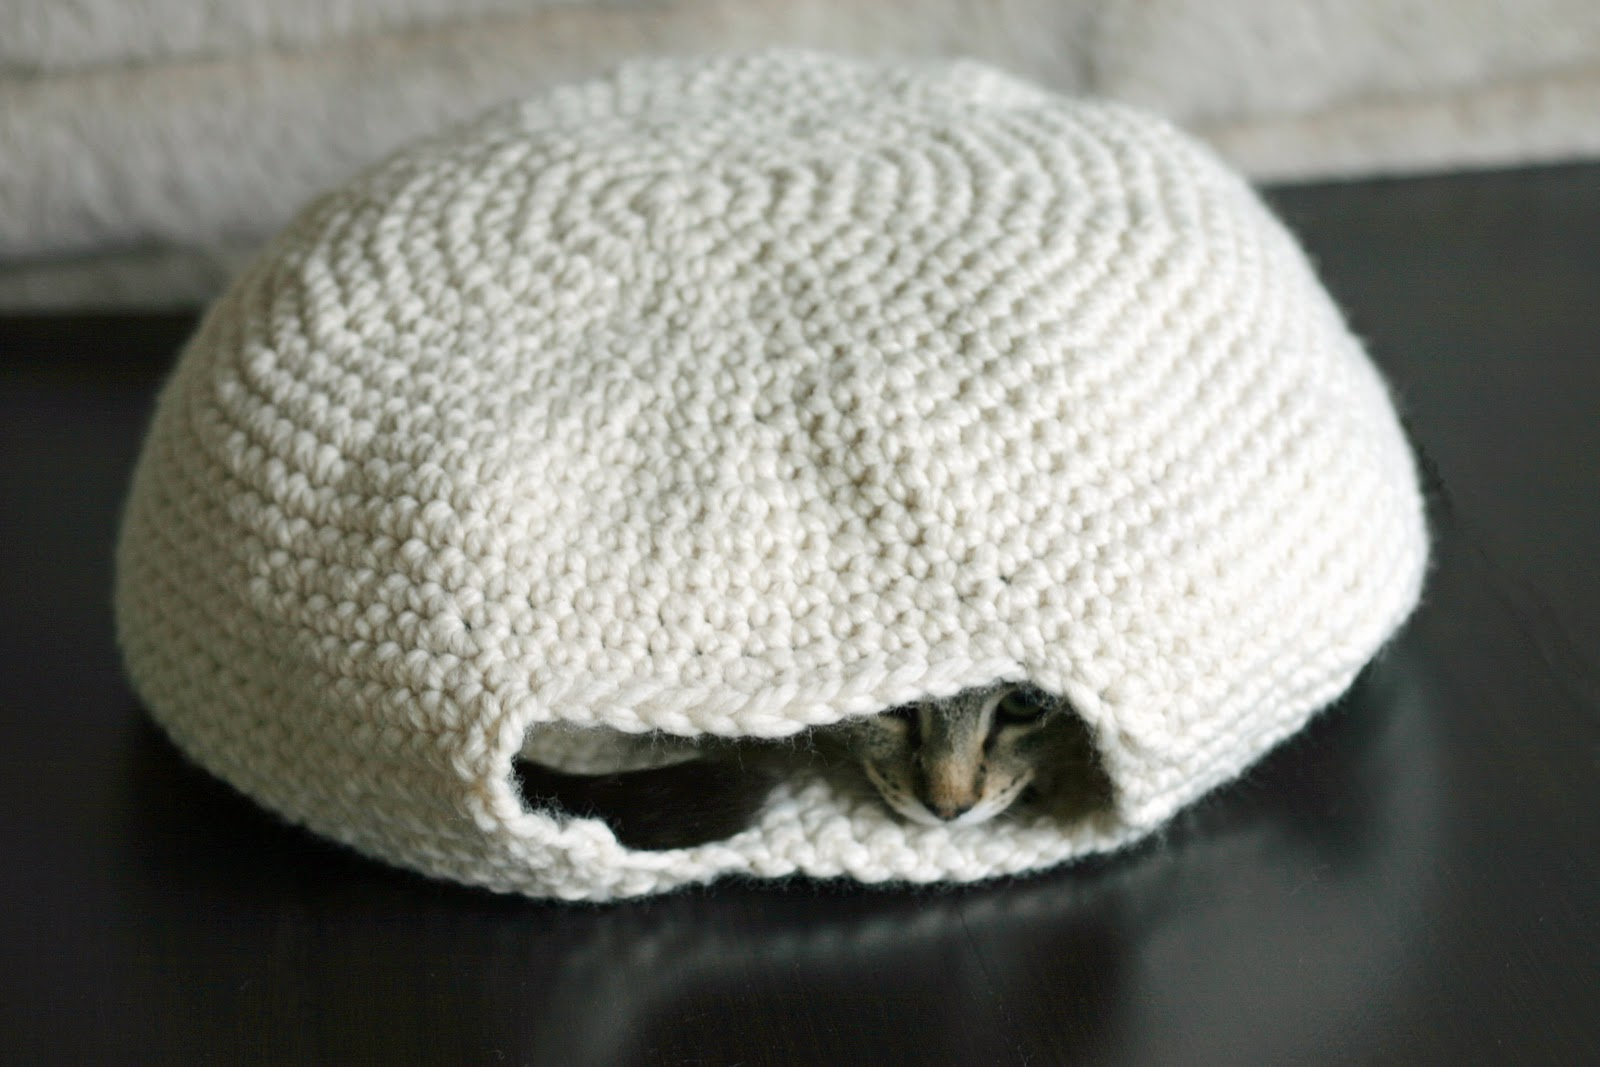 Crochet Cat Bed Pattern Free The Dapper Toad An Oven For My Muffin